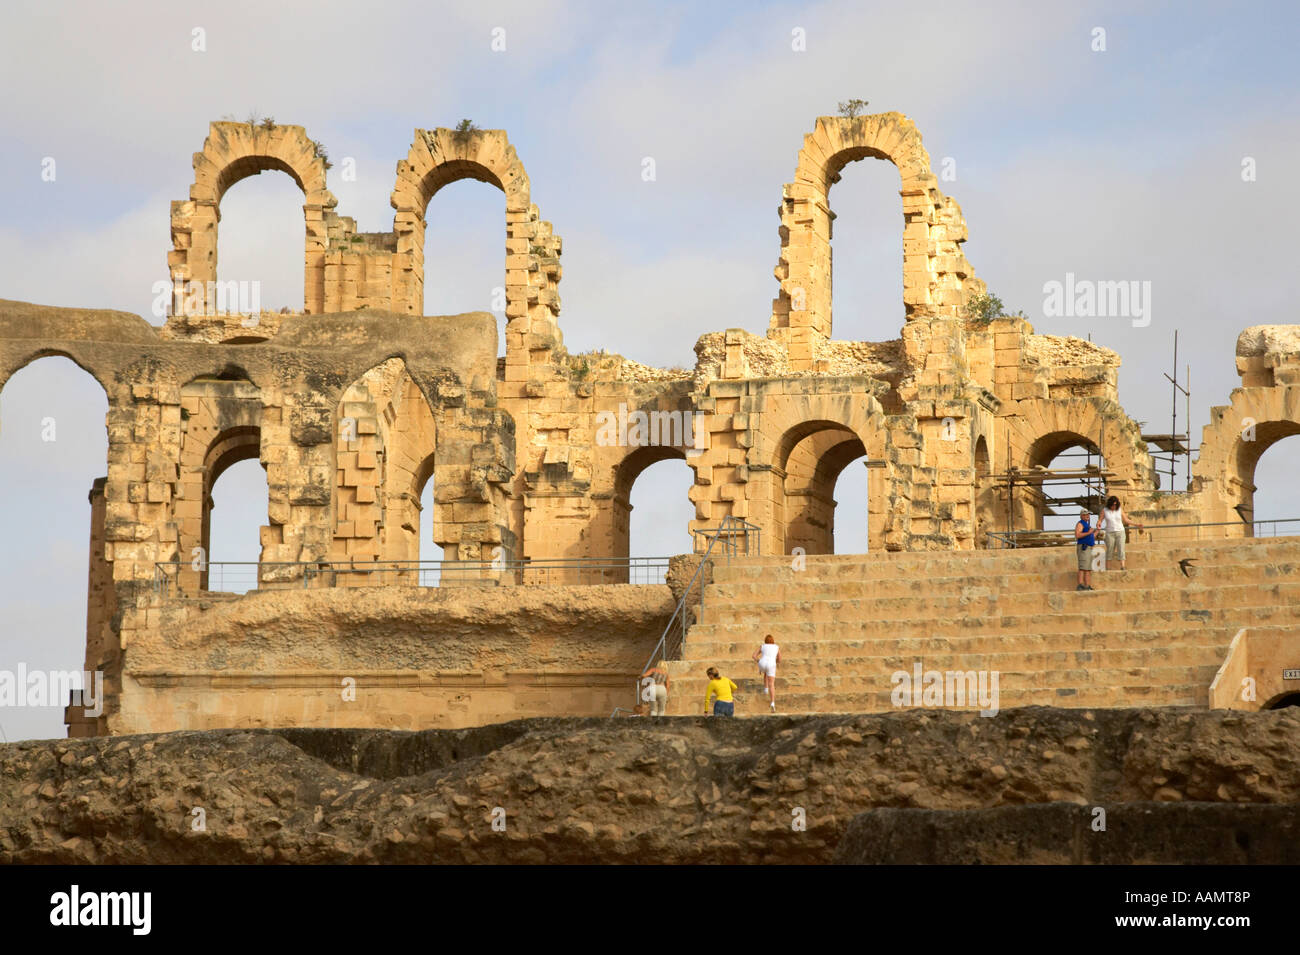 remains of upper tiers of the old roman colloseum at el jem tunisia Stock Photo